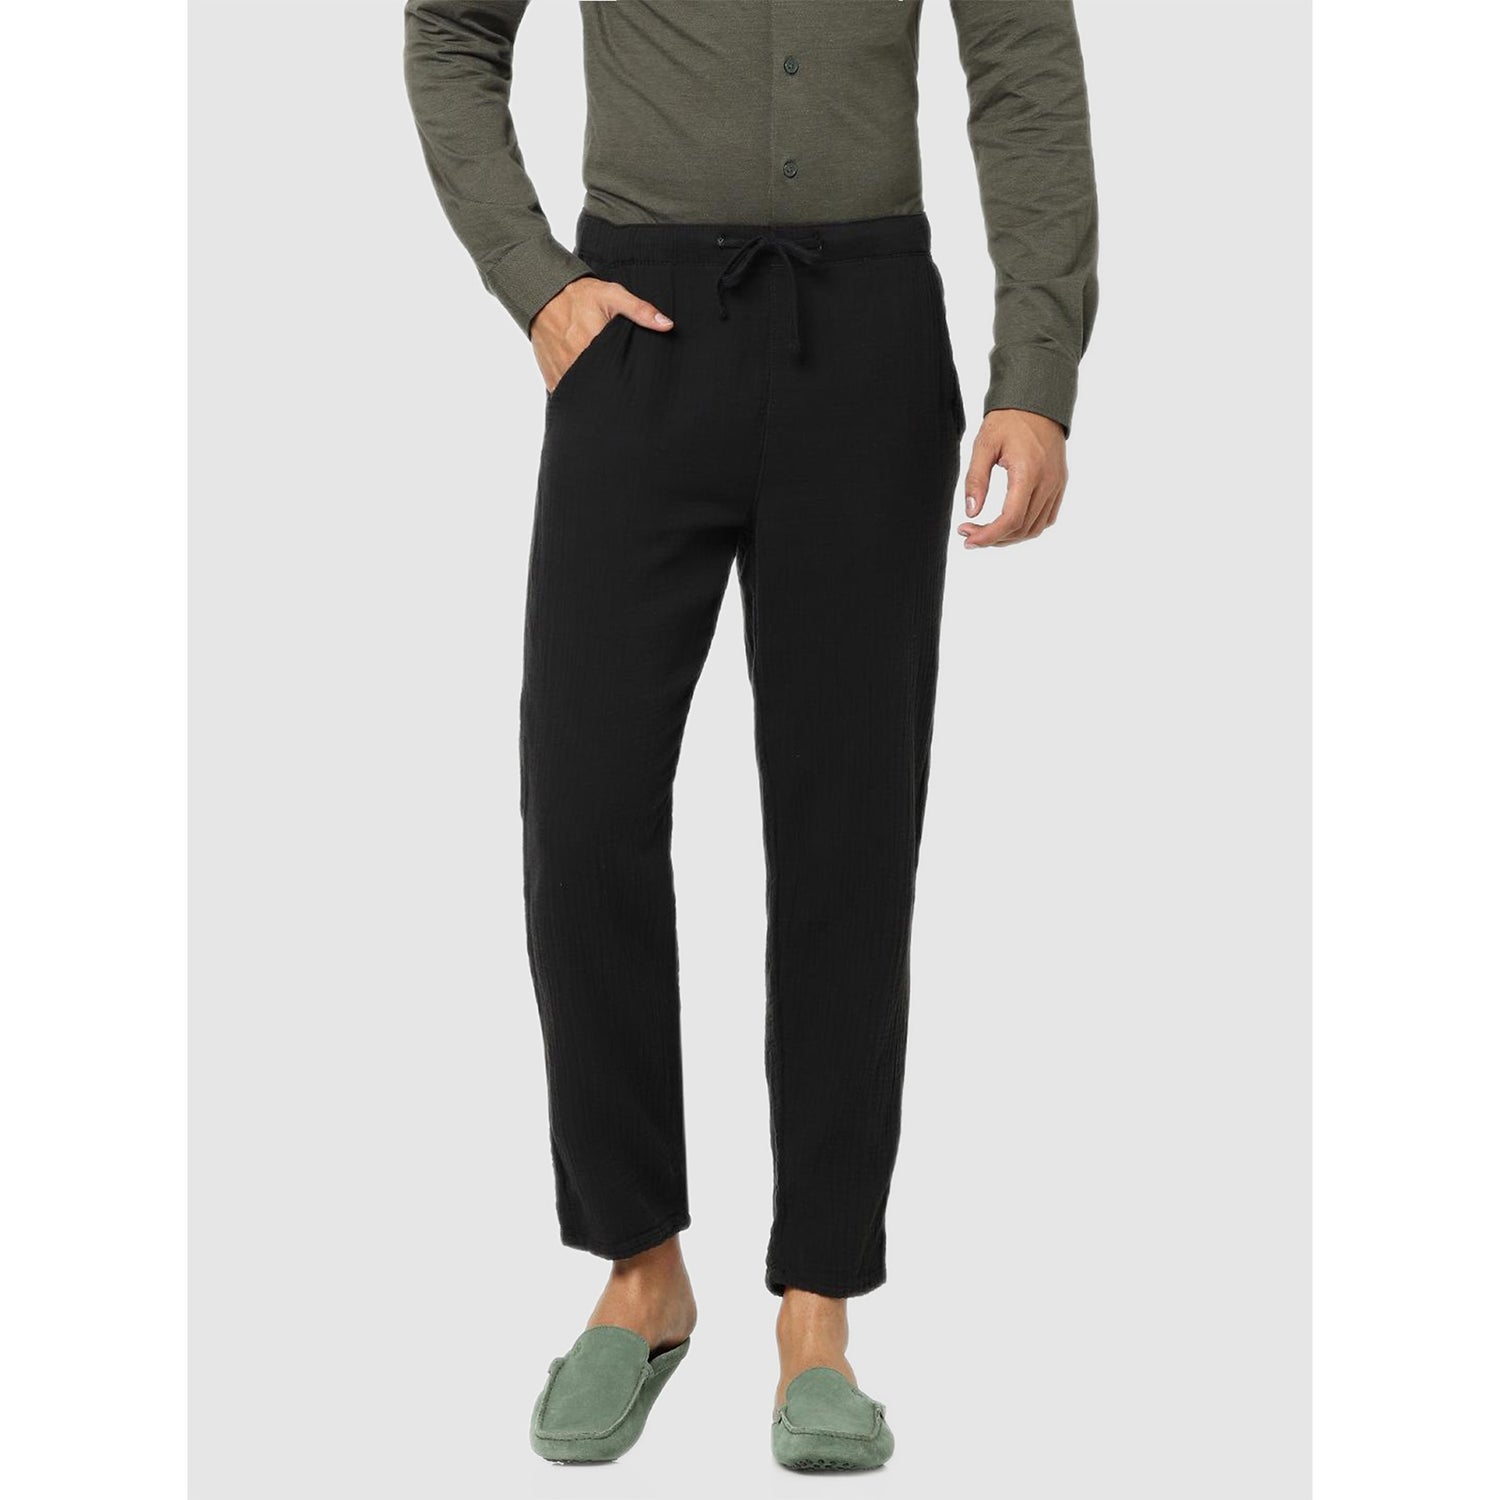 Black Solid Regular Fit Trousers (Various Sizes)